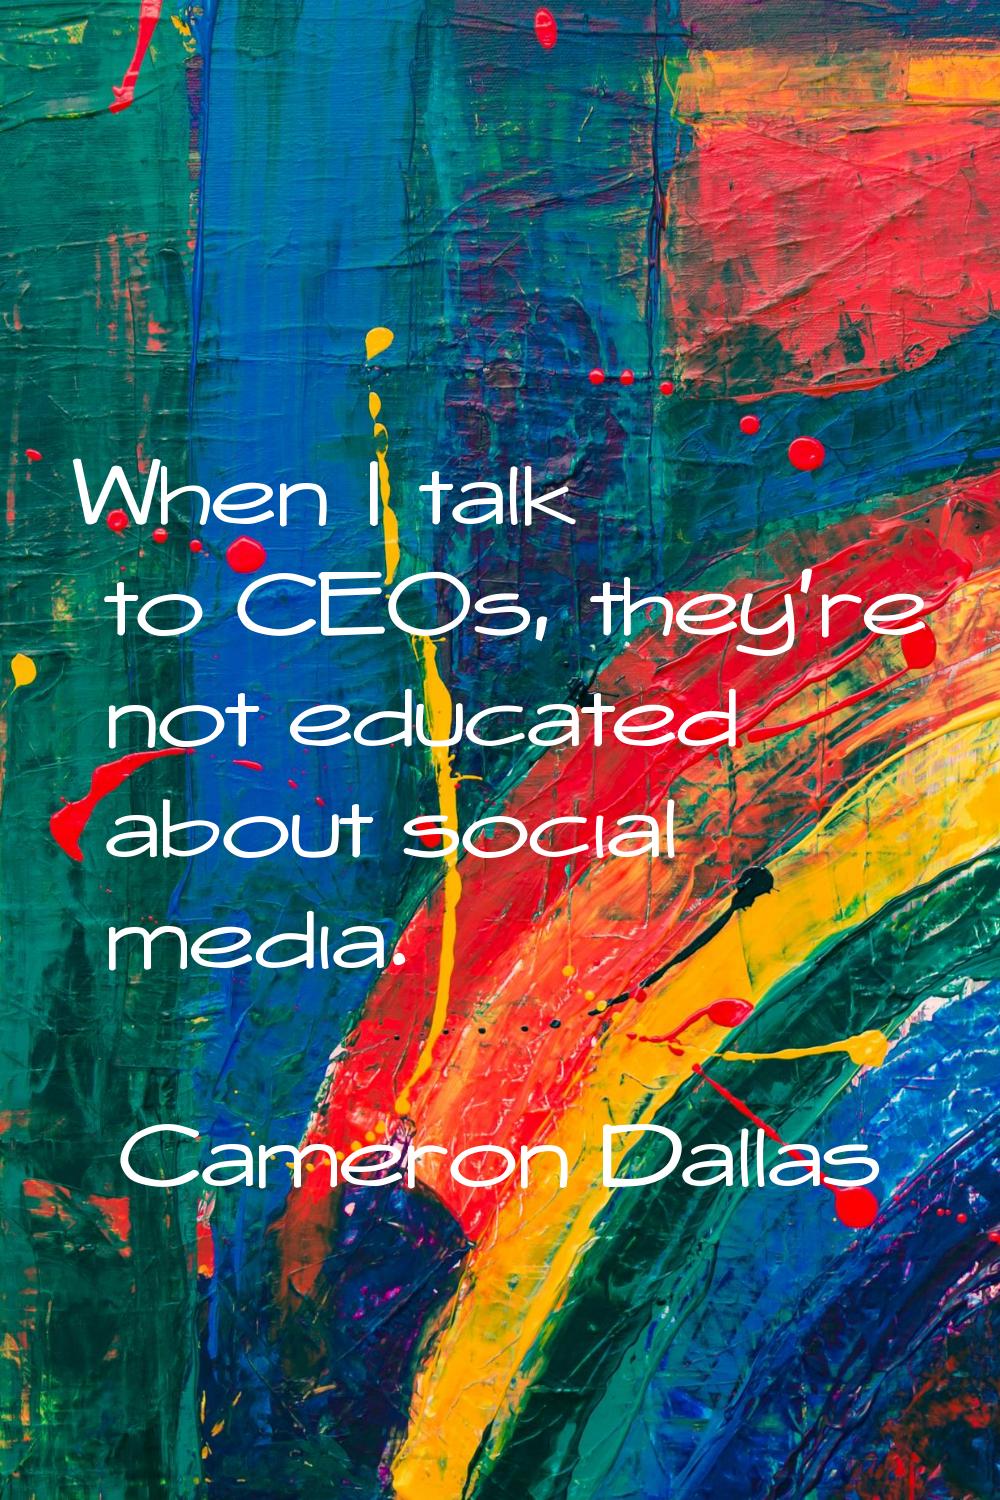 When I talk to CEOs, they're not educated about social media.